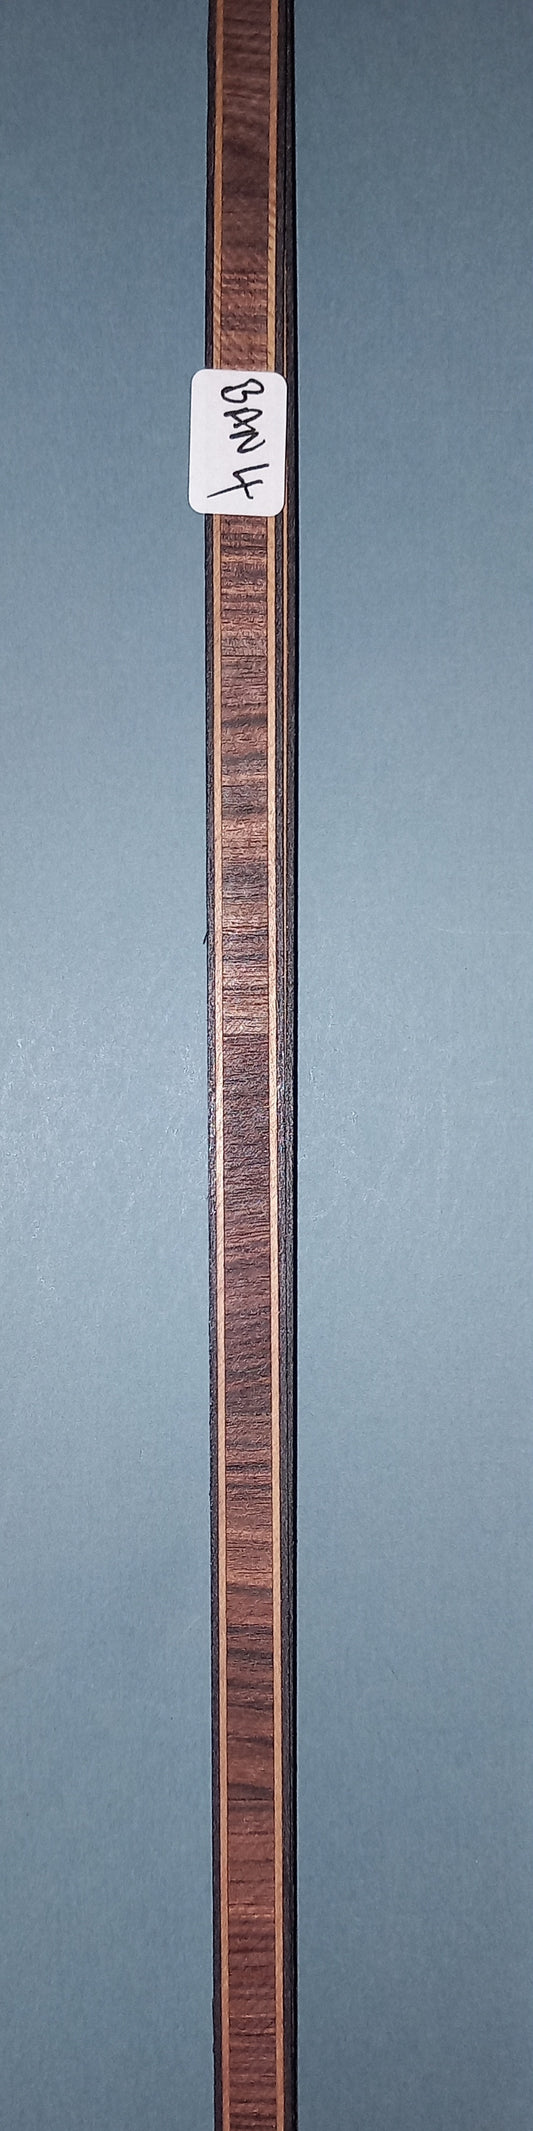 ROSEWOOD MARQUETRY INLAY BANDINGS 0.9MM THICK   10MM X 85CM